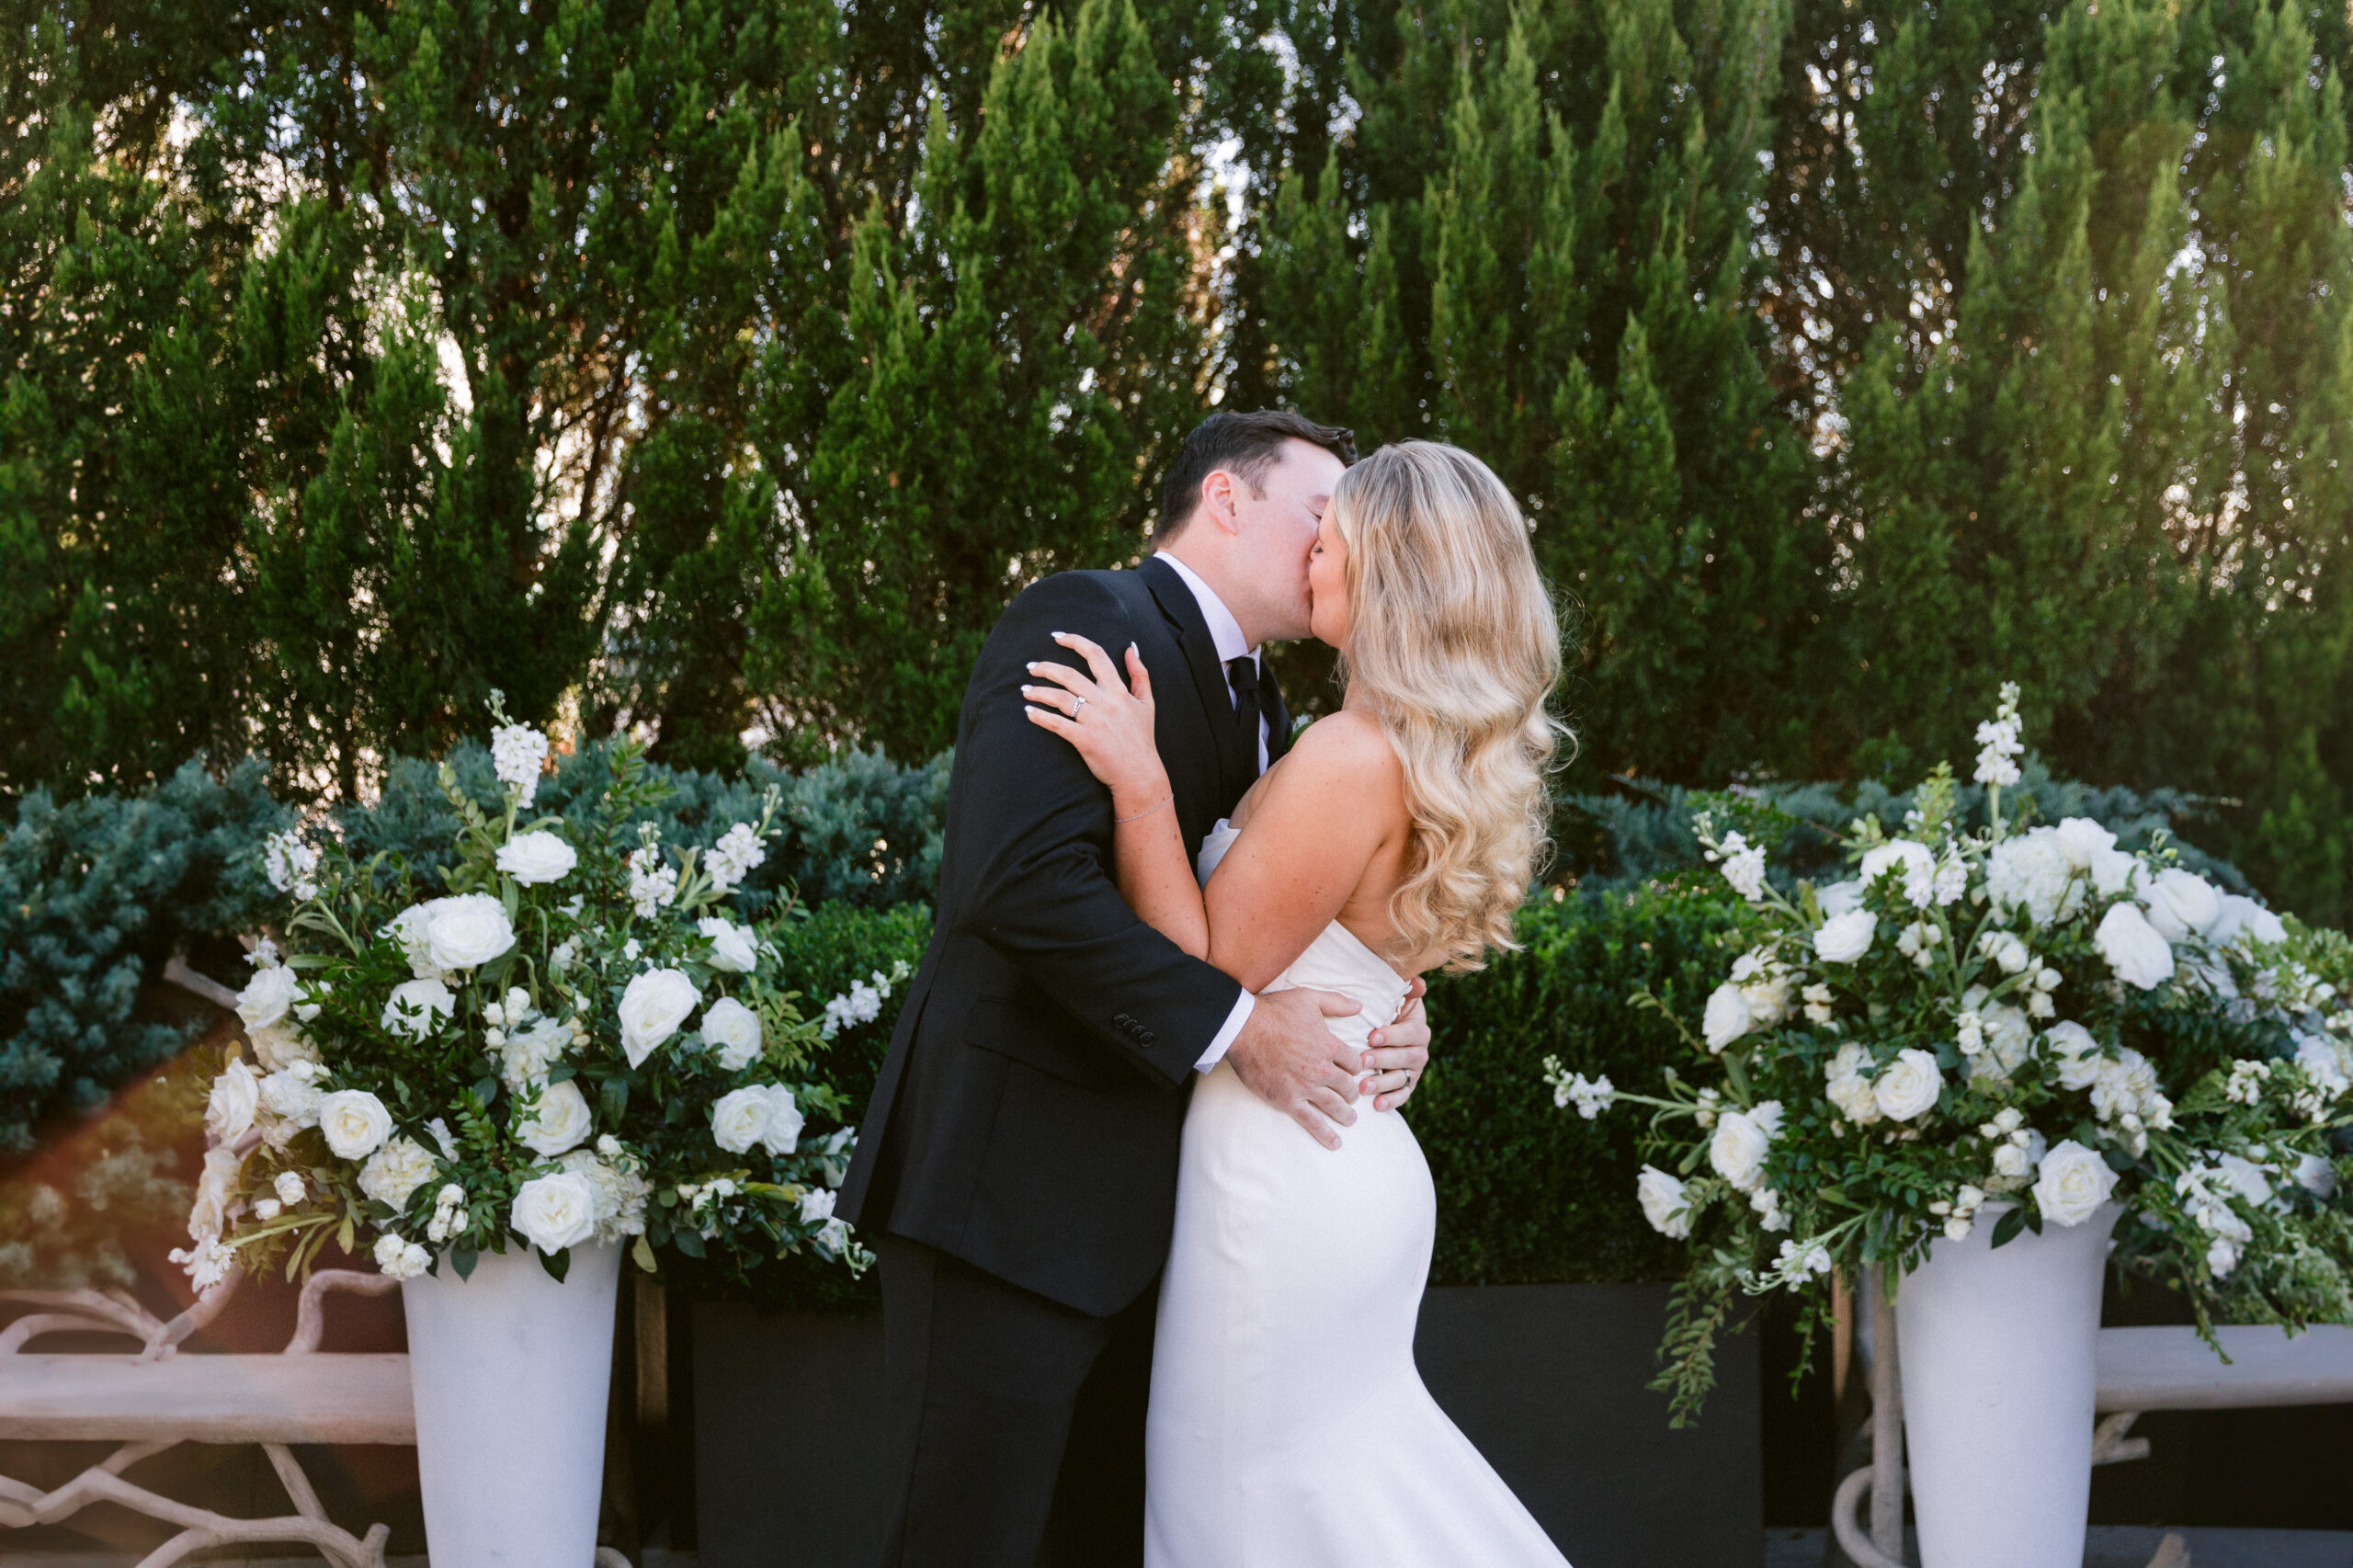 A bride and groom share their first kiss as husband and wife during their wedding ceremony at Avenue in downtown Greenville, SC in front of a wall of florals and greenery.